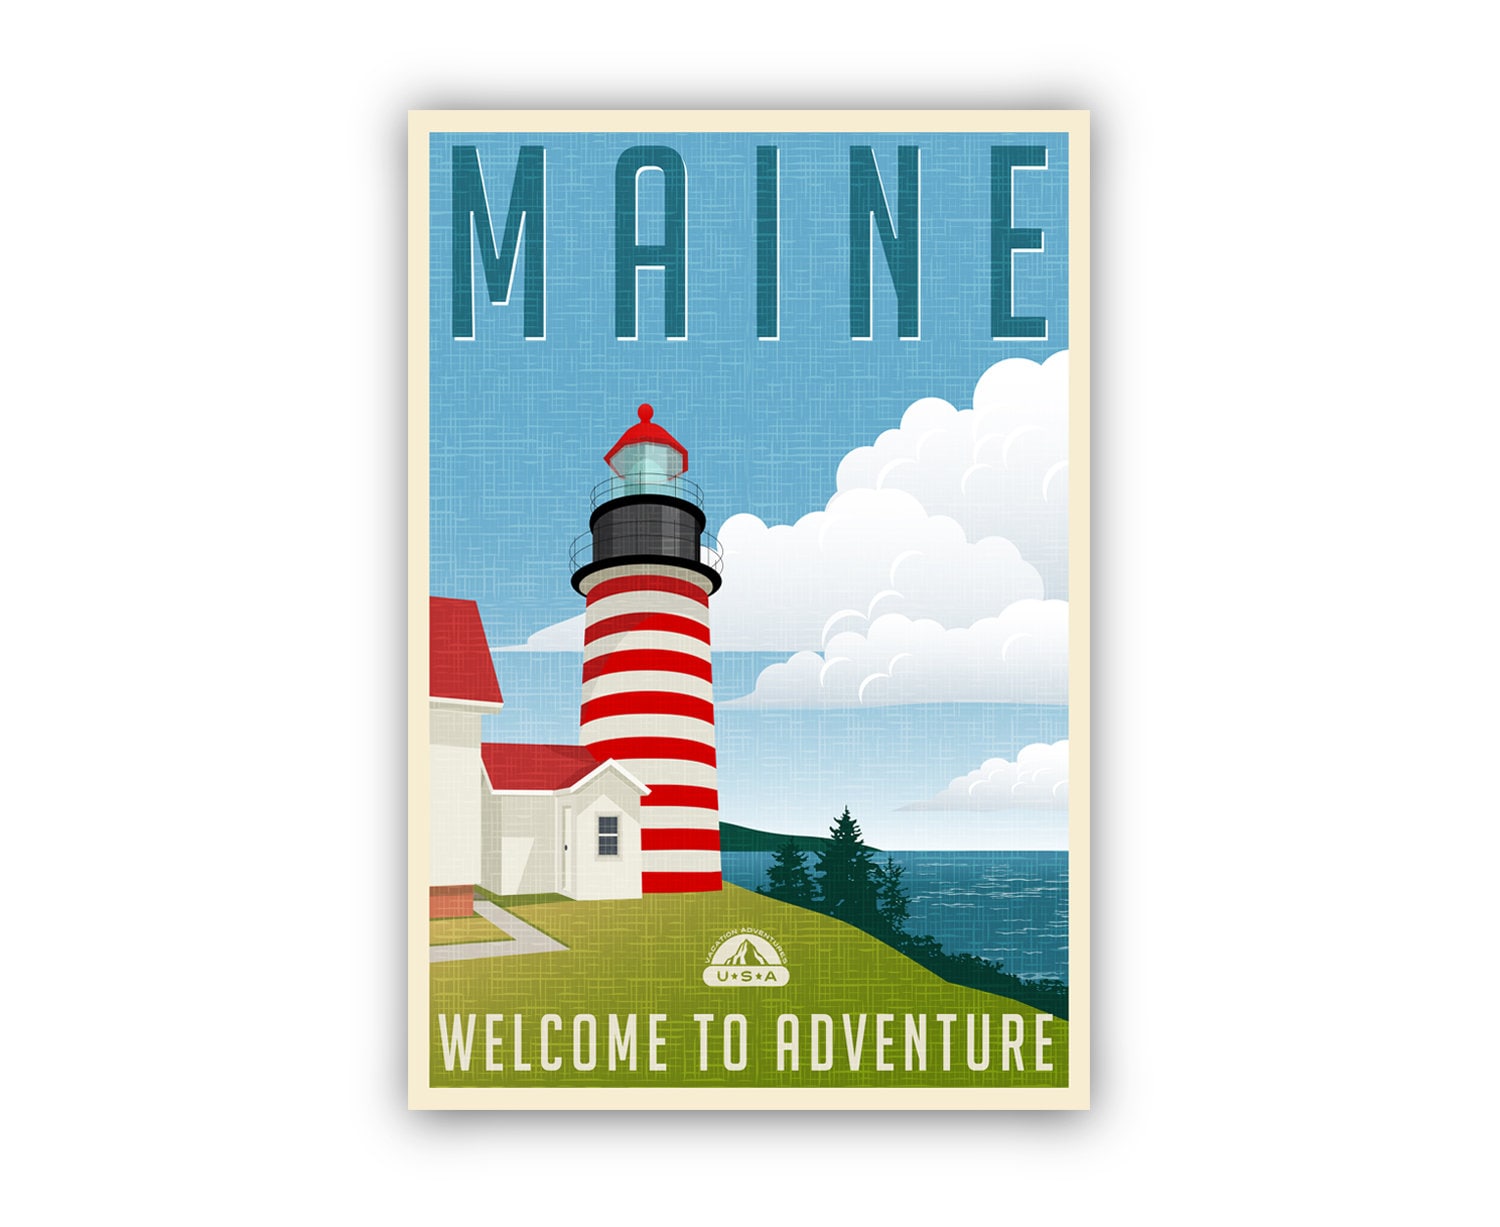 Maine Vintage Rustic Poster Print, Retro Style Travel Poster